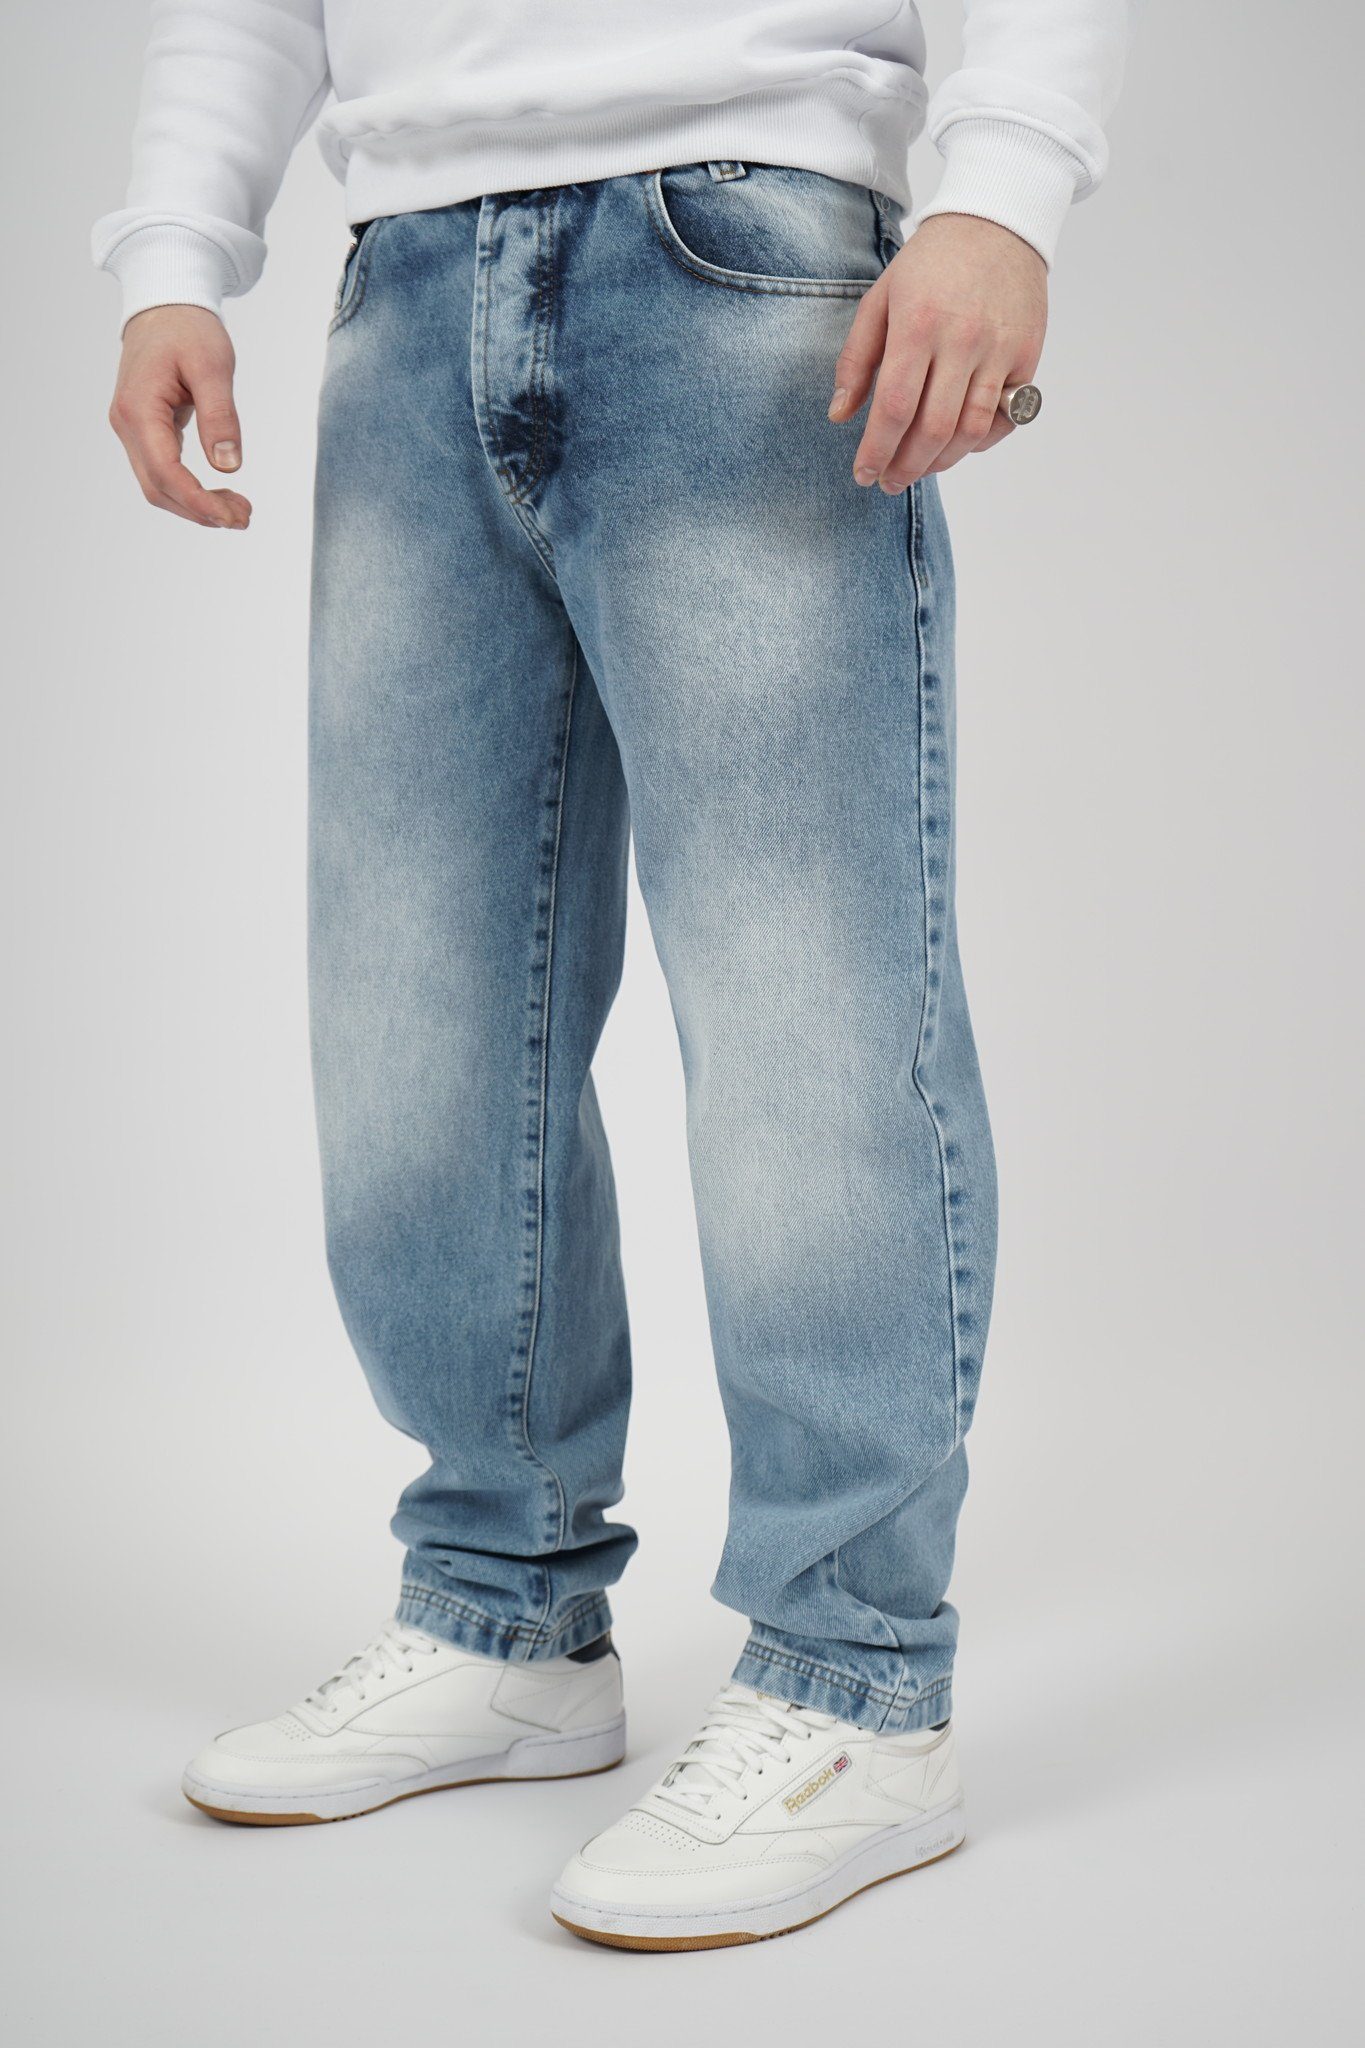 PICALDI Jeans Weite Jeans Zicco 472 Loose Fit, Relaxed Fit Cali